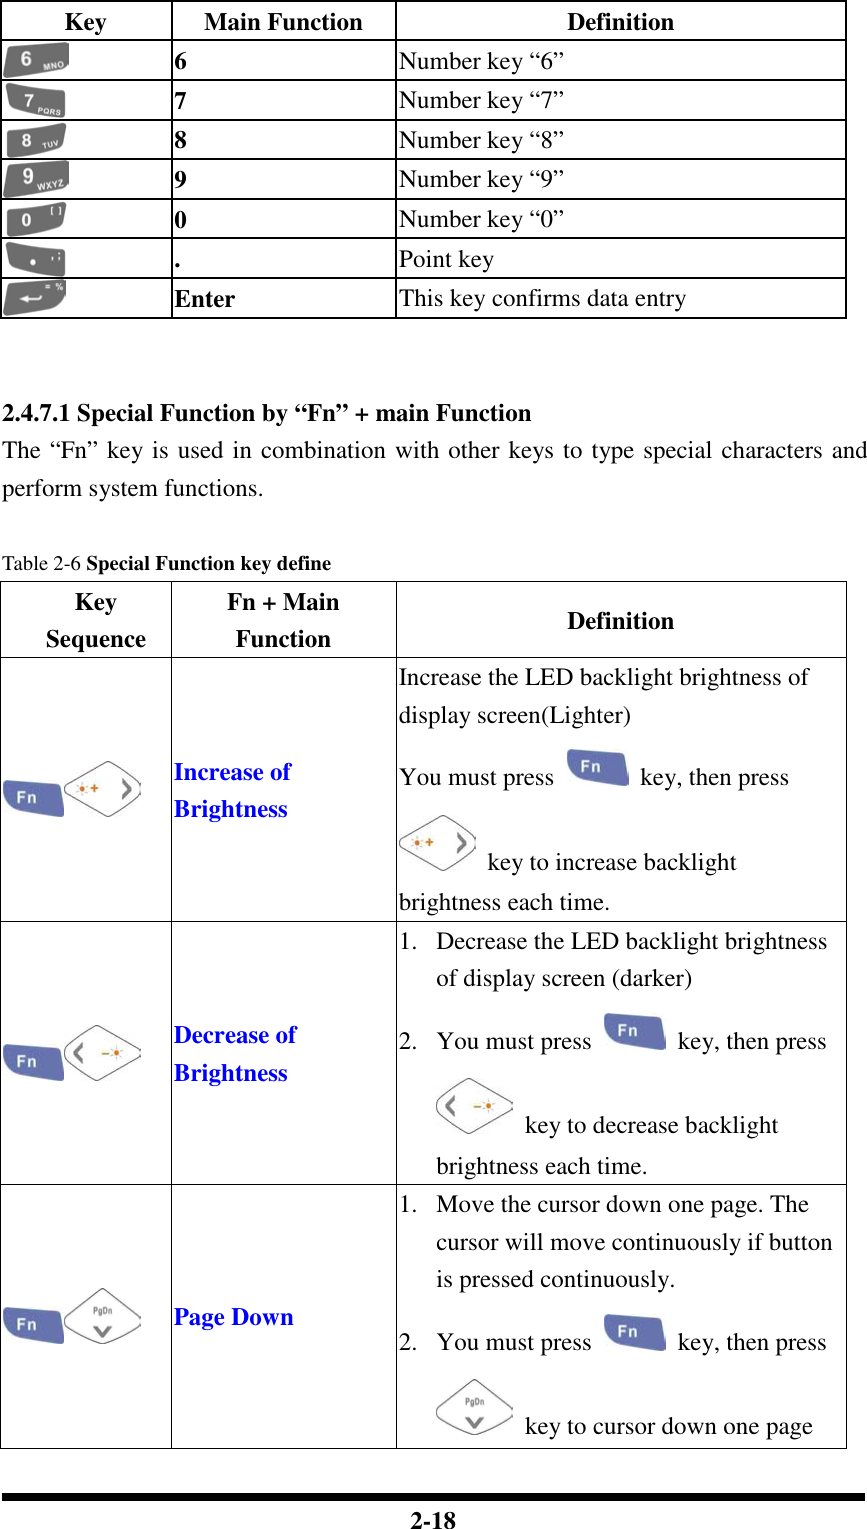  2-18 Key  Main Function  Definition  6  Number key “6”  7  Number key “7”  8  Number key “8”  9  Number key “9”  0  Number key “0”  .  Point key  Enter  This key confirms data entry   2.4.7.1 Special Function by “Fn” + main Function The “Fn” key is used in combination with other keys to type special characters and perform system functions.  Table 2-6 Special Function key define Key Sequence Fn + Main Function  Definition  Increase of Brightness Increase the LED backlight brightness of display screen(Lighter) You must press    key, then press   key to increase backlight brightness each time.  Decrease of Brightness 1. Decrease the LED backlight brightness of display screen (darker) 2. You must press    key, then press   key to decrease backlight brightness each time.  Page Down 1. Move the cursor down one page. The cursor will move continuously if button is pressed continuously. 2. You must press    key, then press   key to cursor down one page 